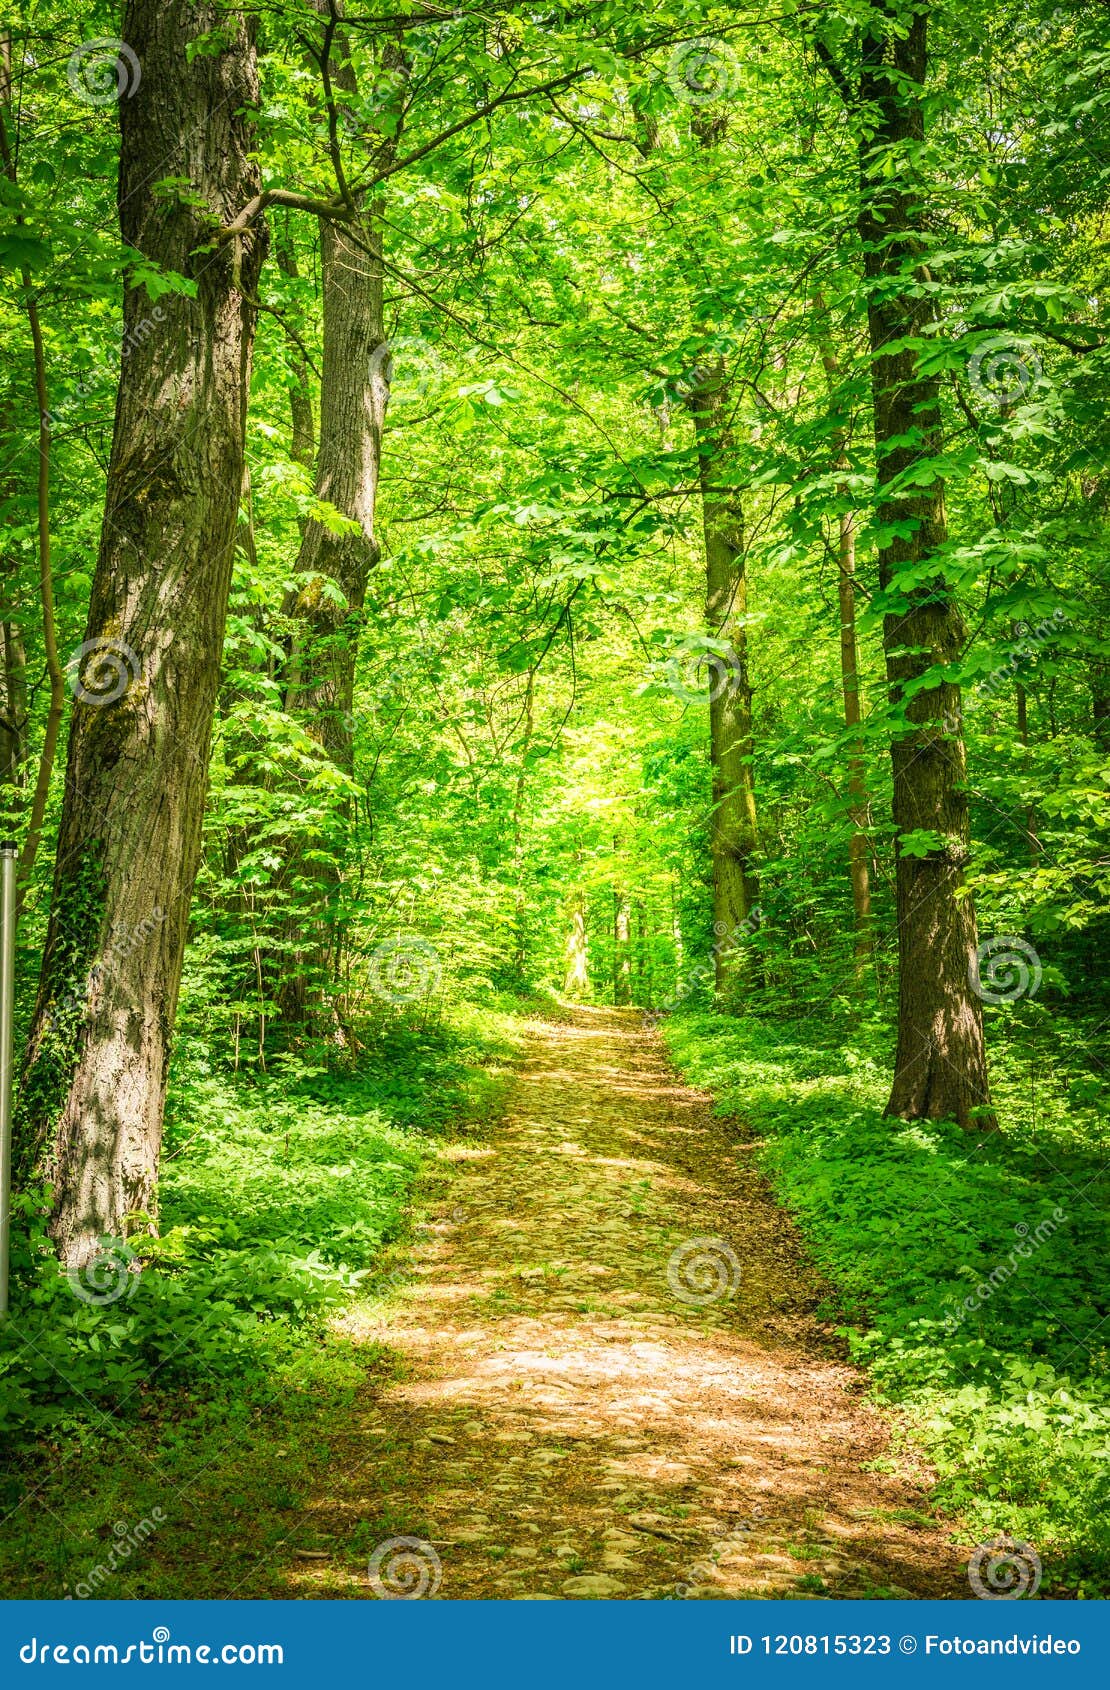 green forest green nature forest path #pathway #path #woods #enchanting #8K  #wallpaper #hdwallpaper #desktop | Forest path, Forest mural, Tree wall  murals